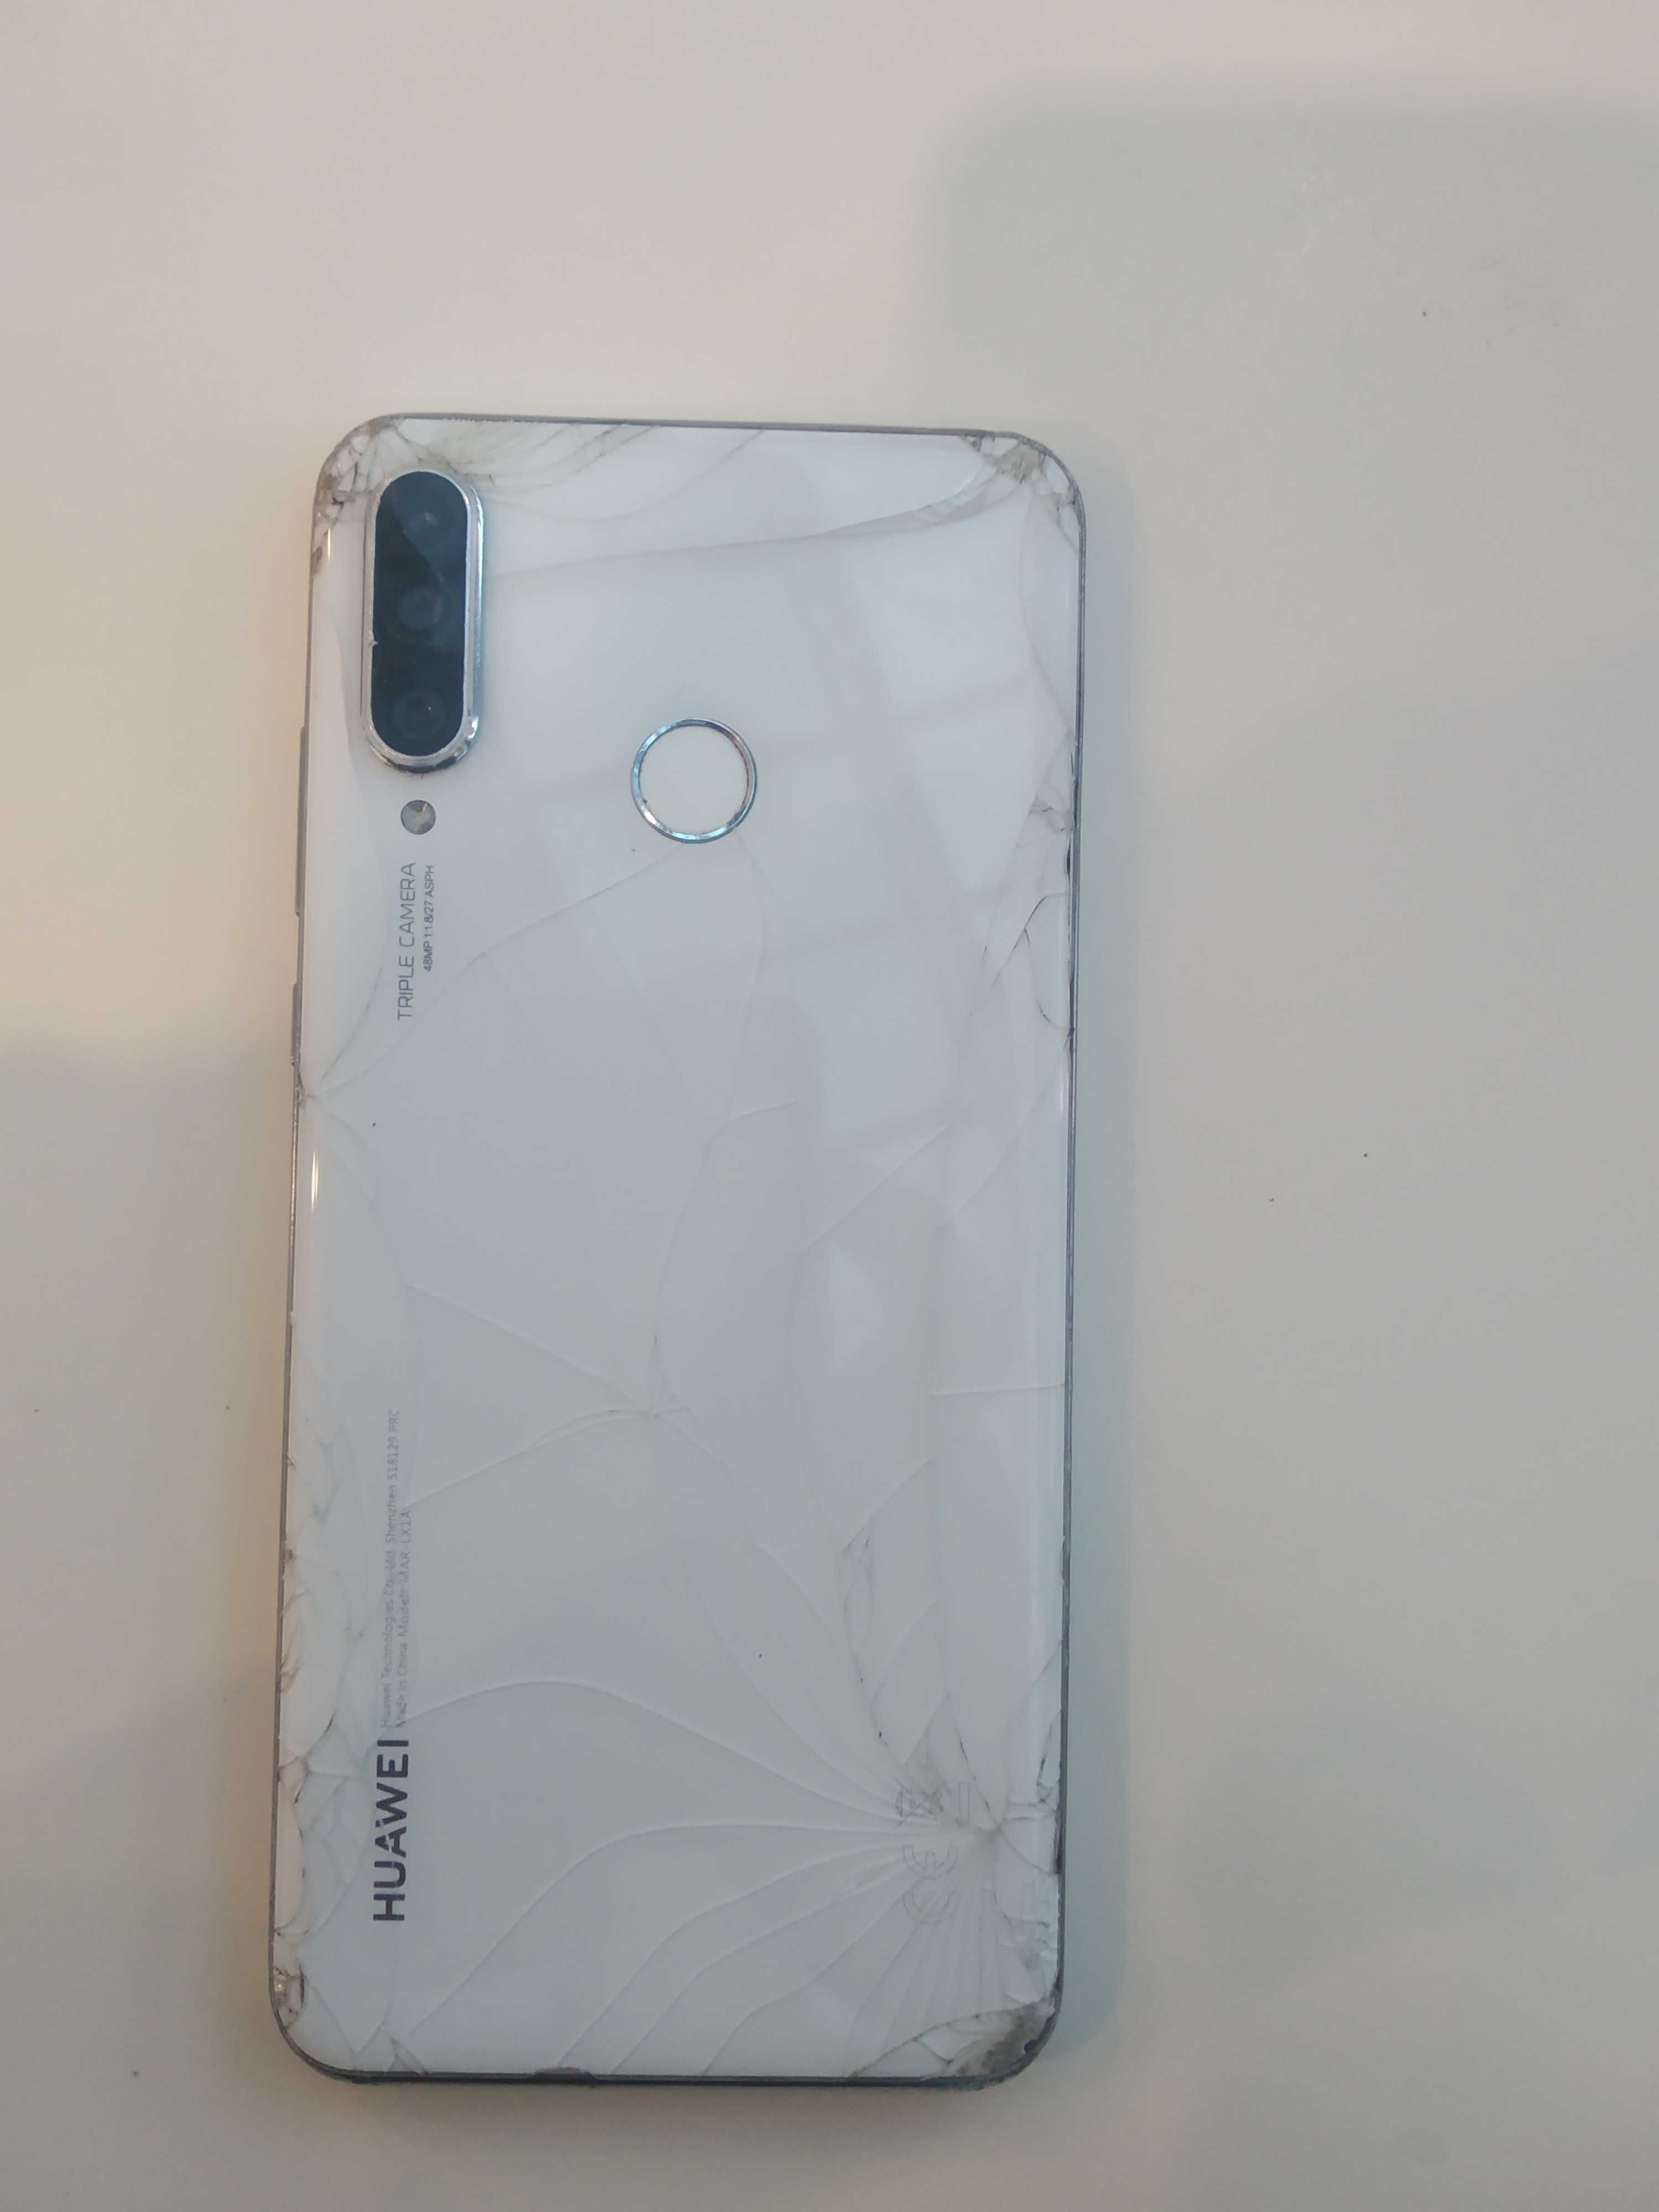 Huawei P30 lite Android